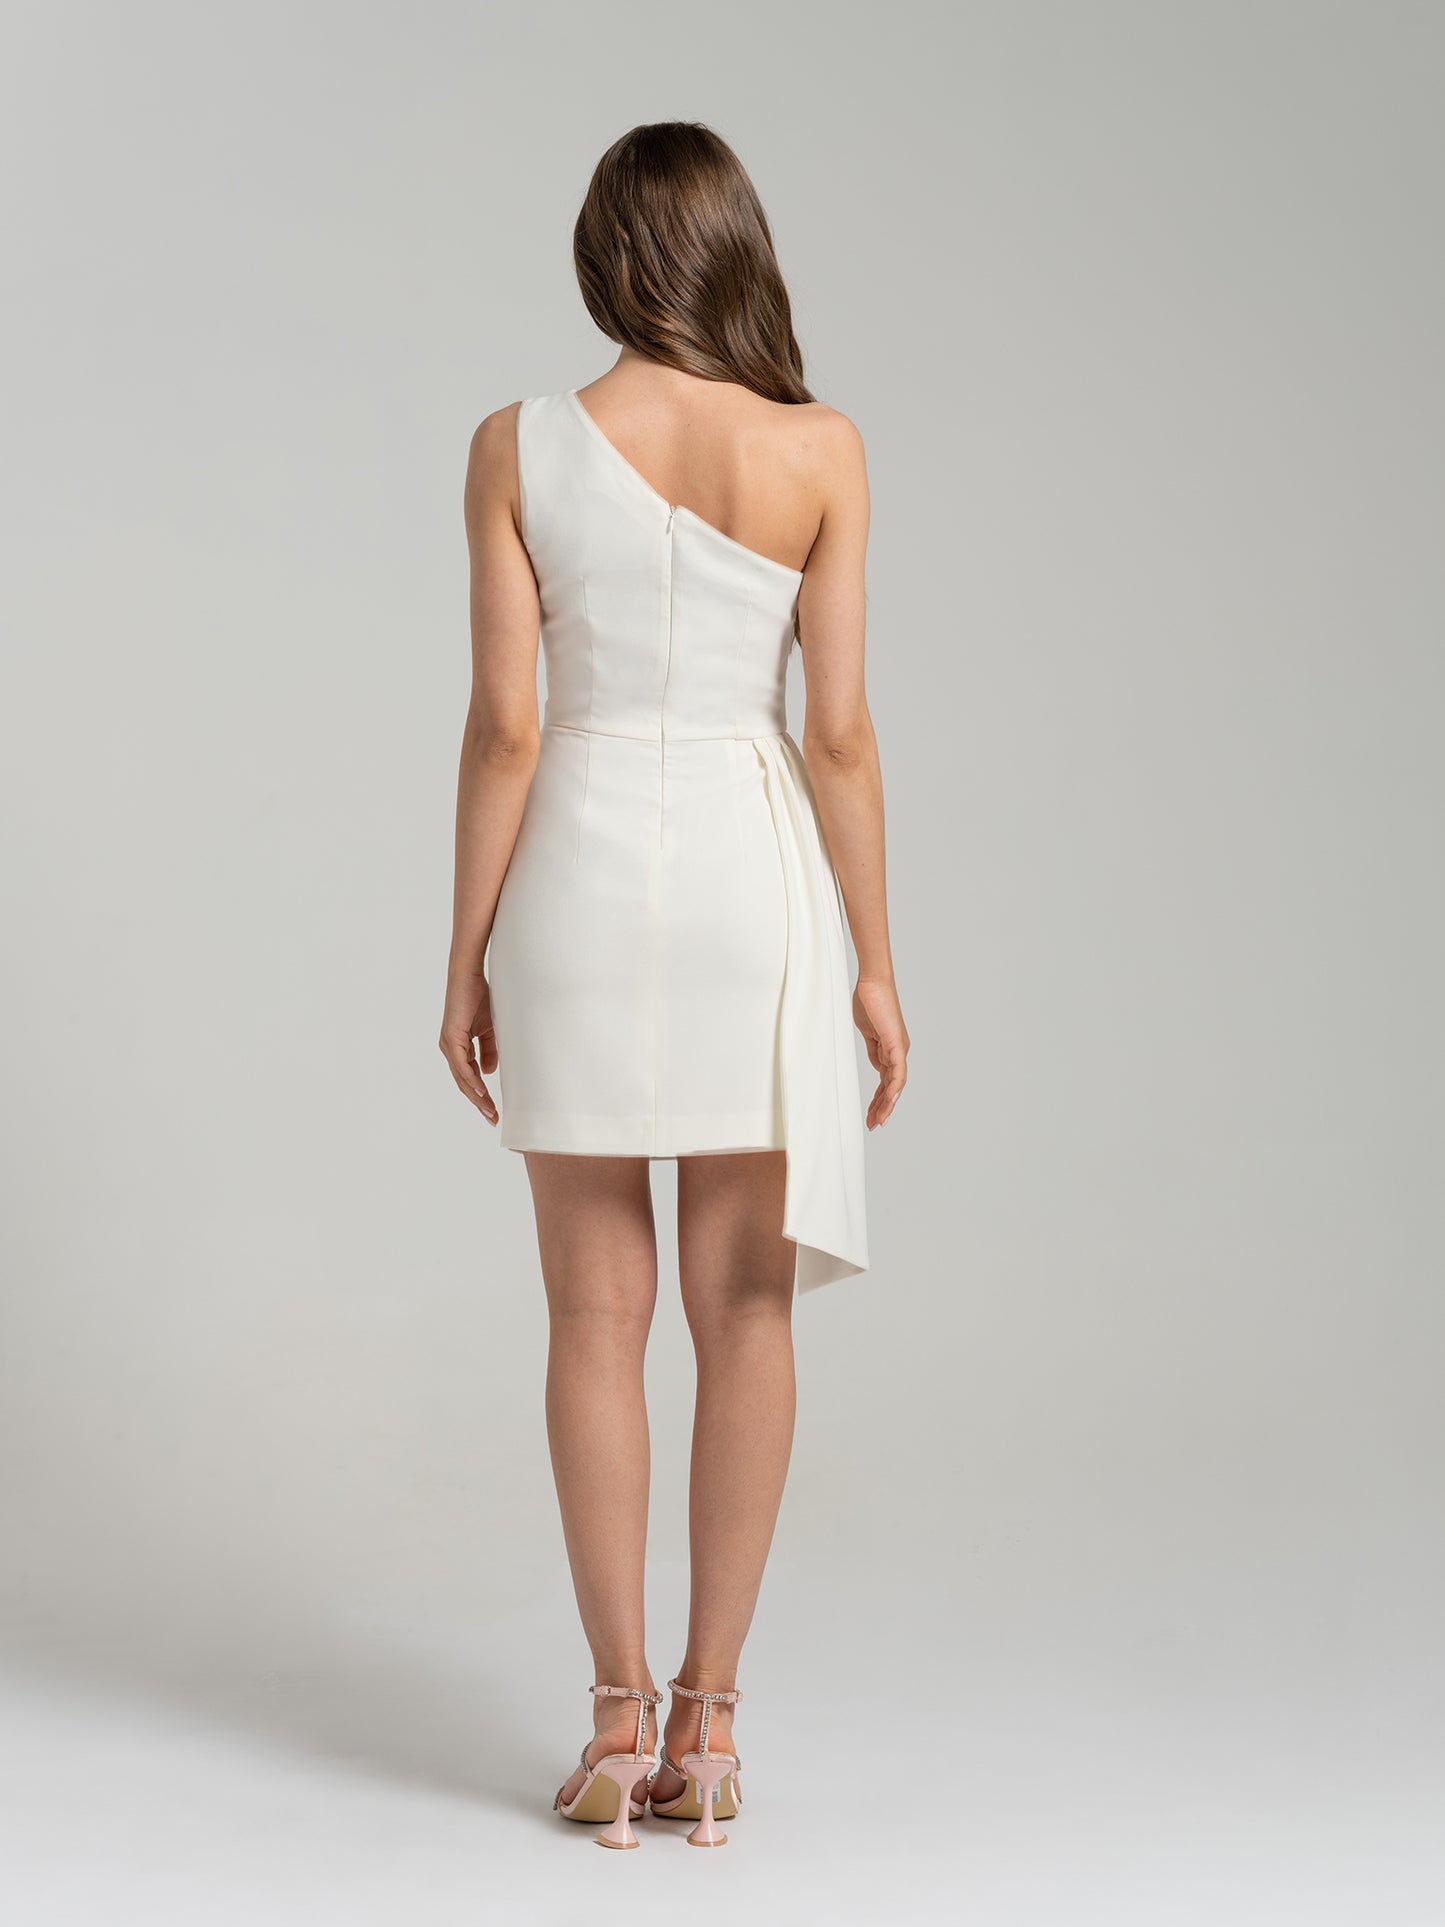 Iconic Glamour Short Dress - Pearl White